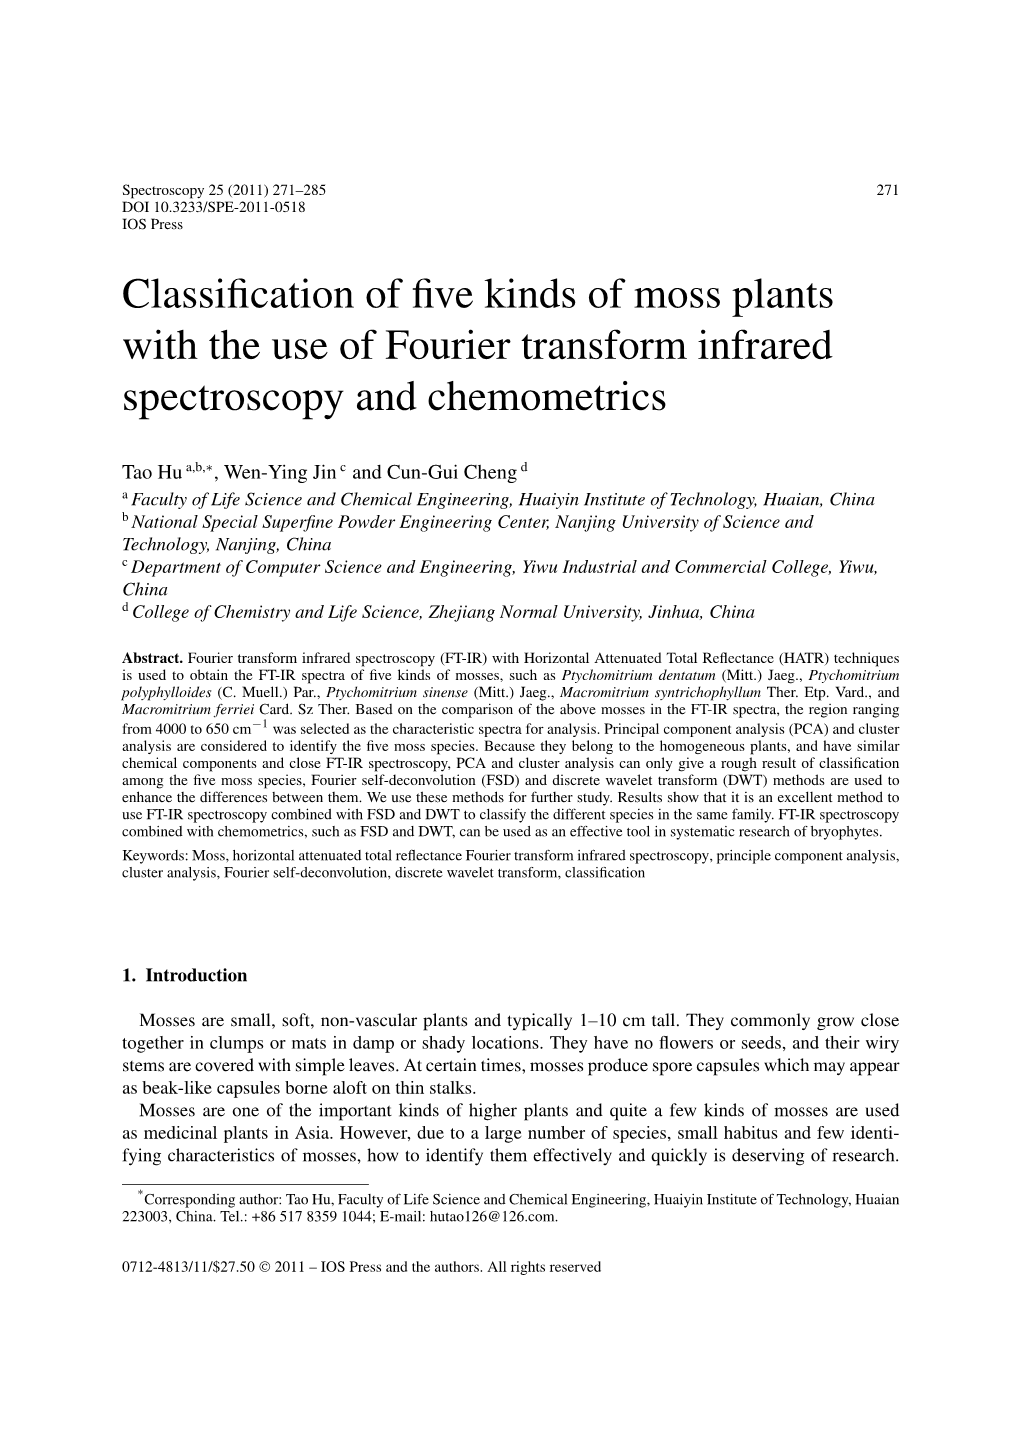 Classification of Five Kinds of Moss Plants with the Use of Fourier